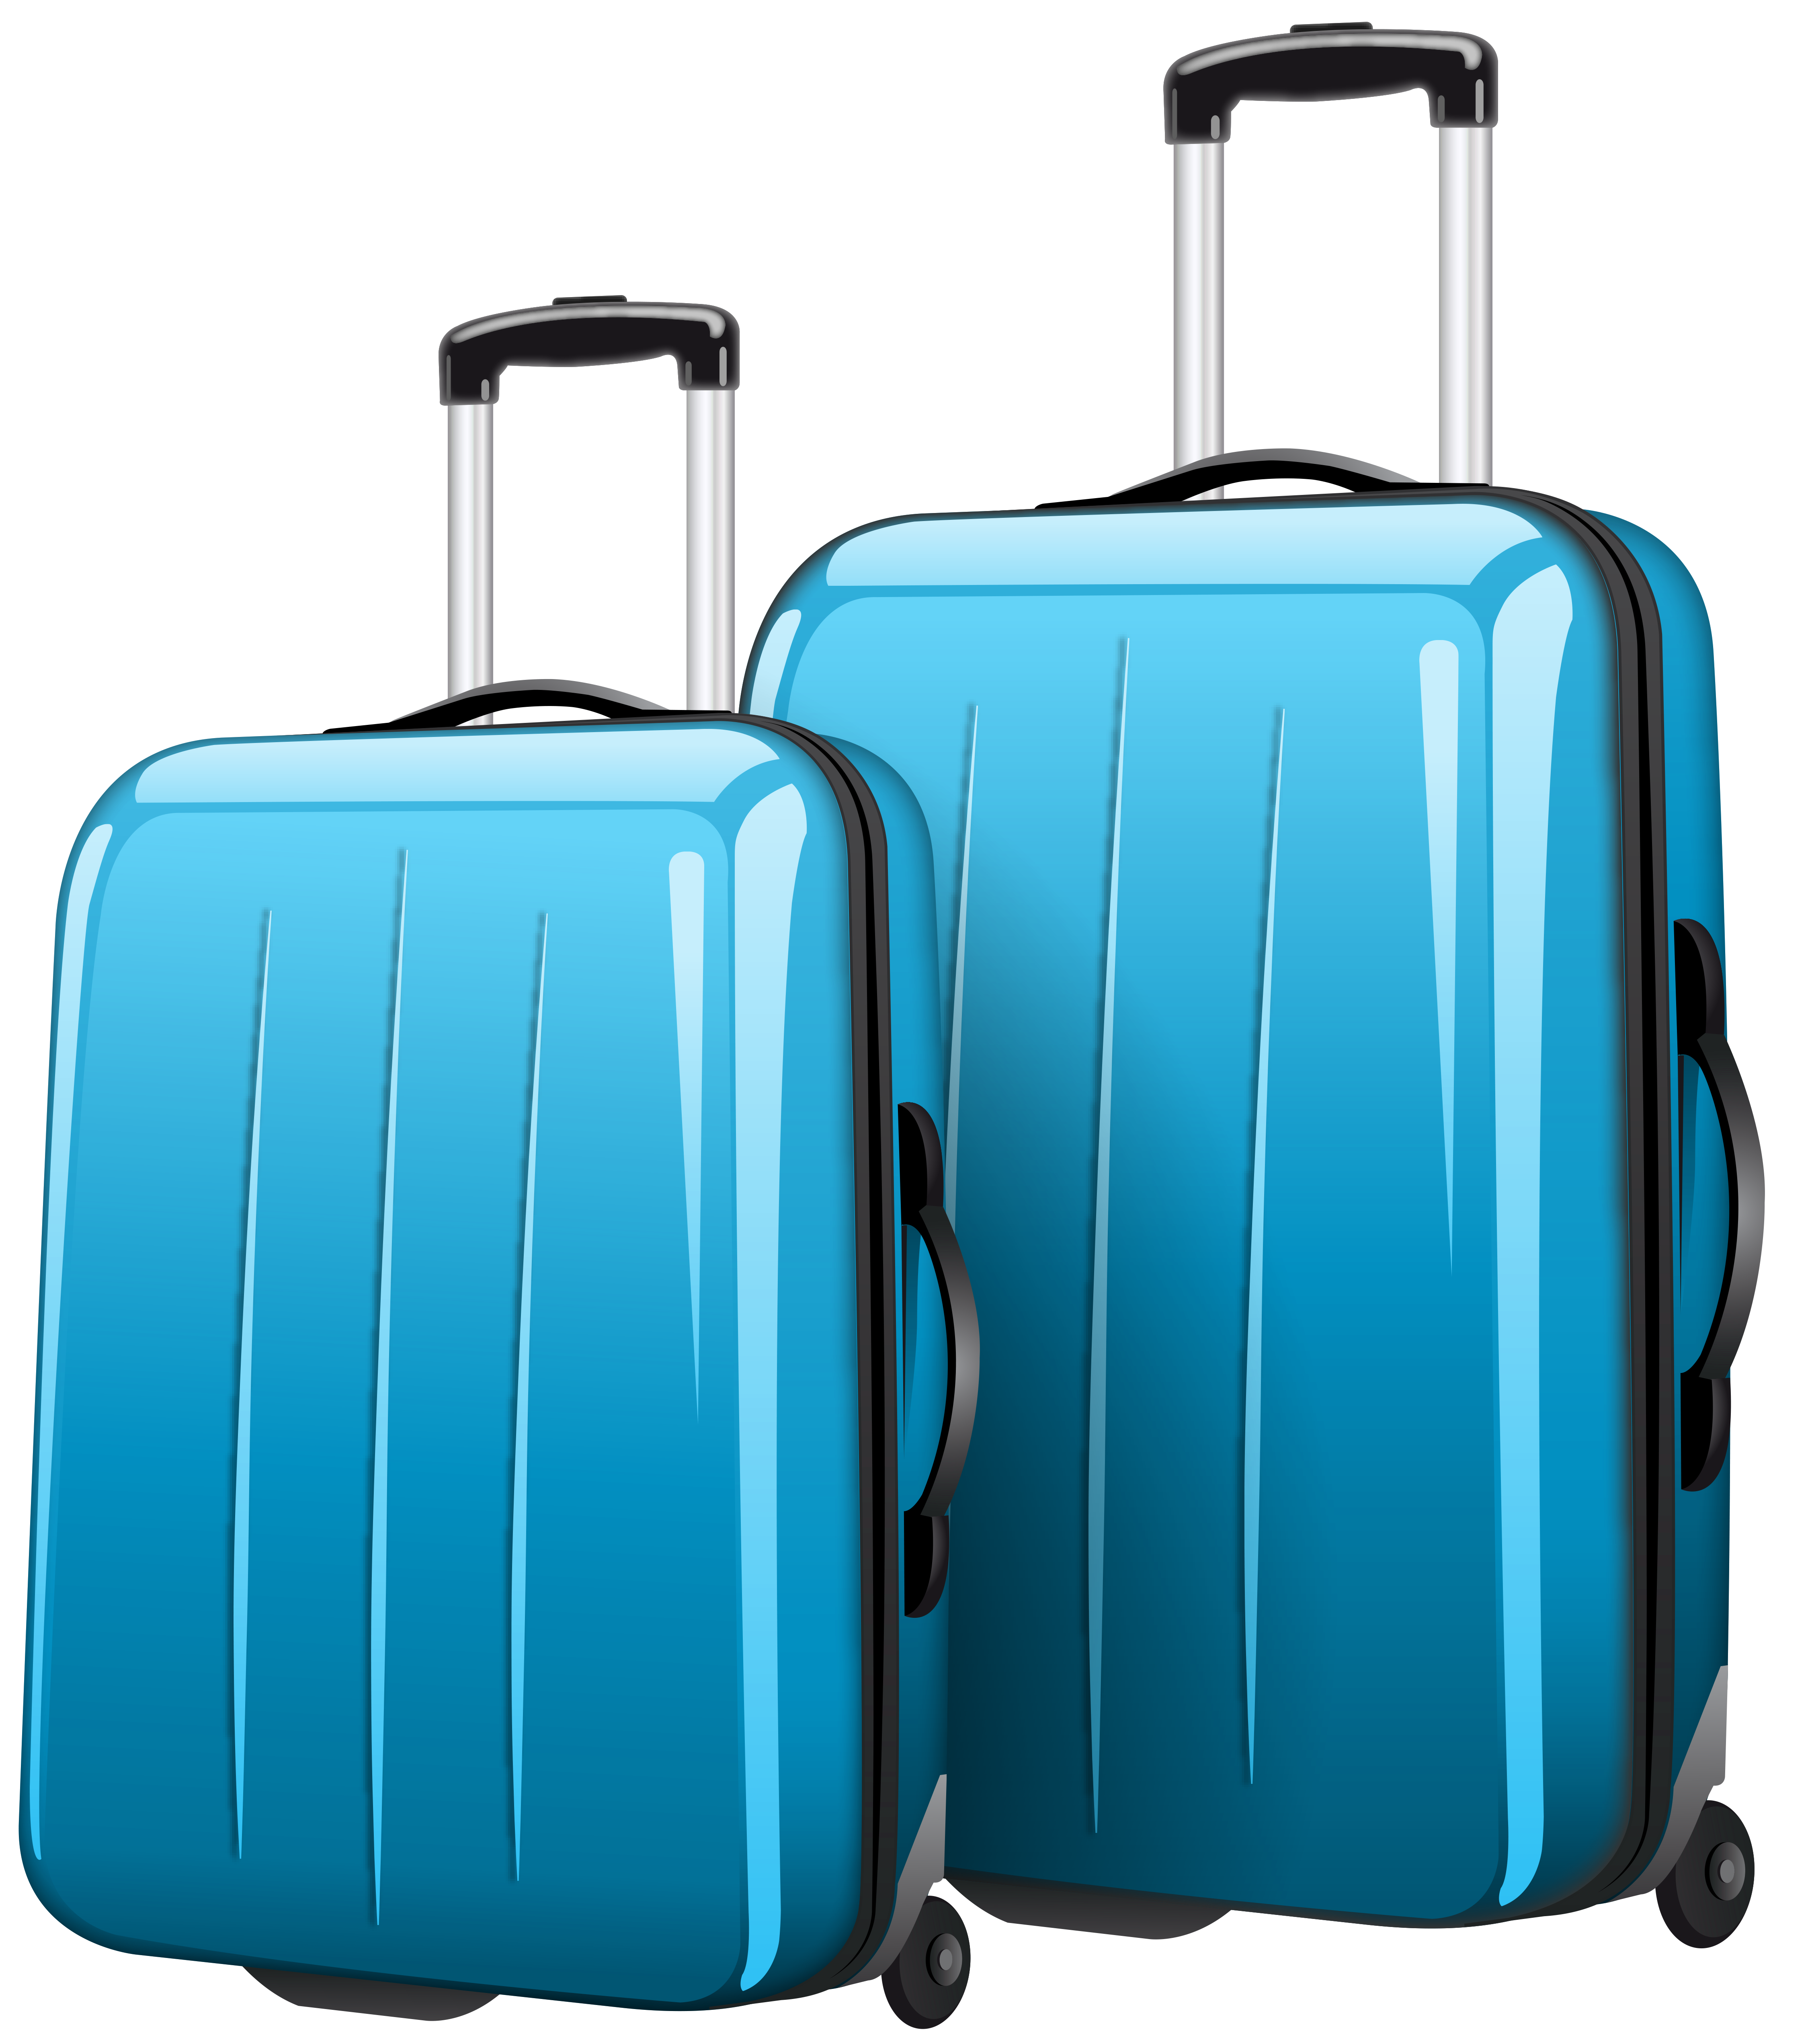 Two Blue Travel Bags PNG Clipart Picture  Gallery 